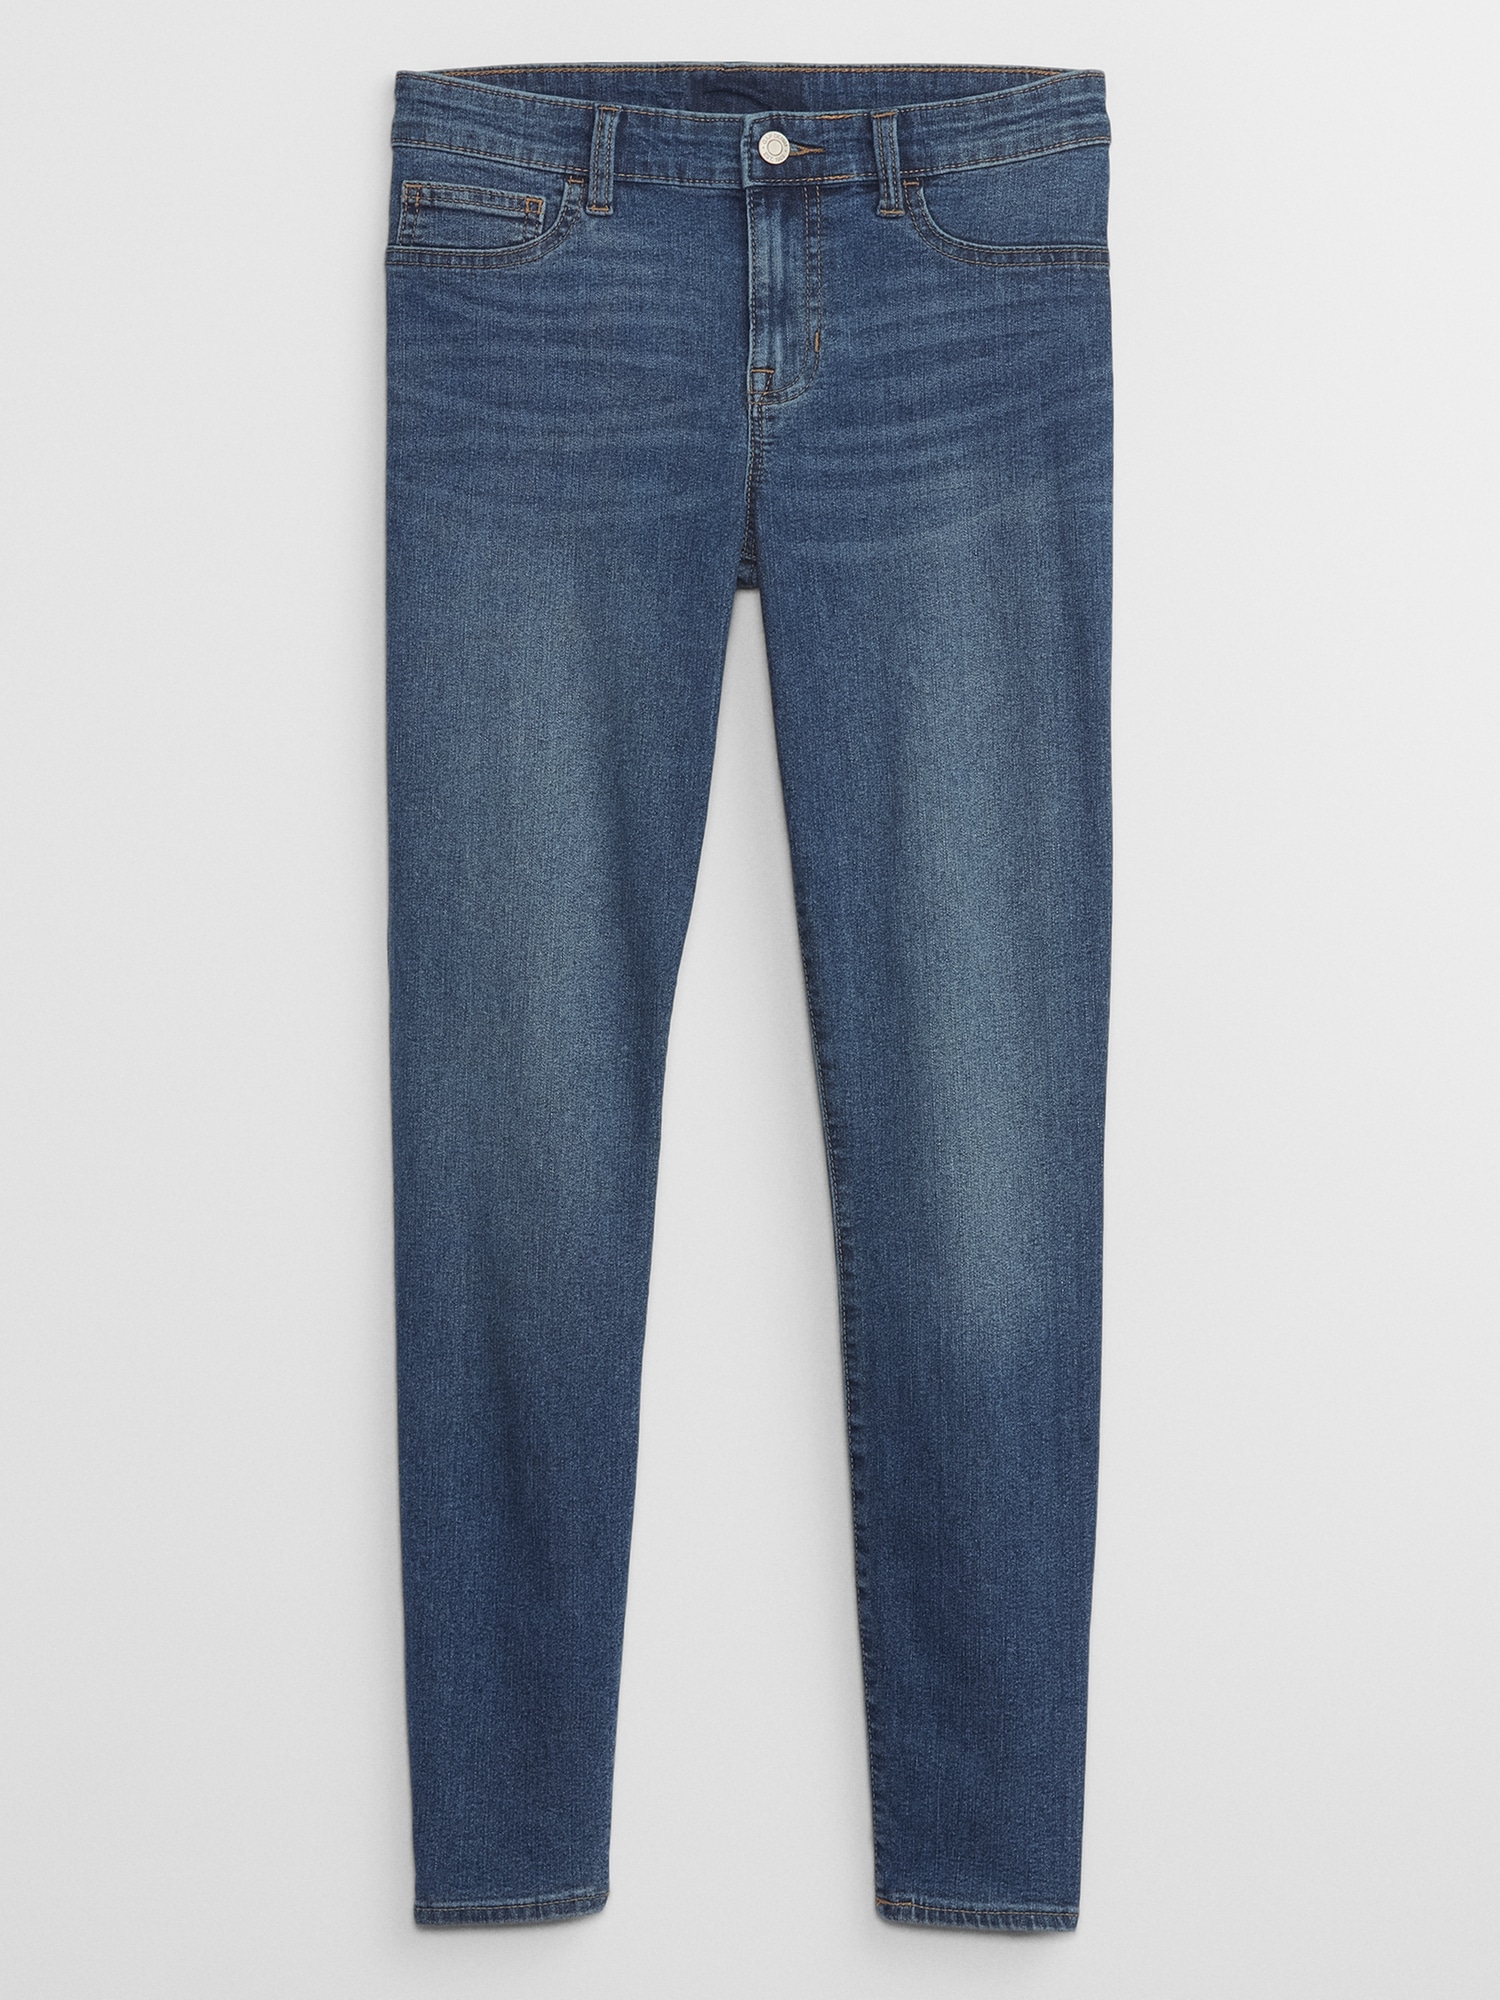 Just Love Women's Denim Jeggings with Pockets - Comfortable Stretch Jeans